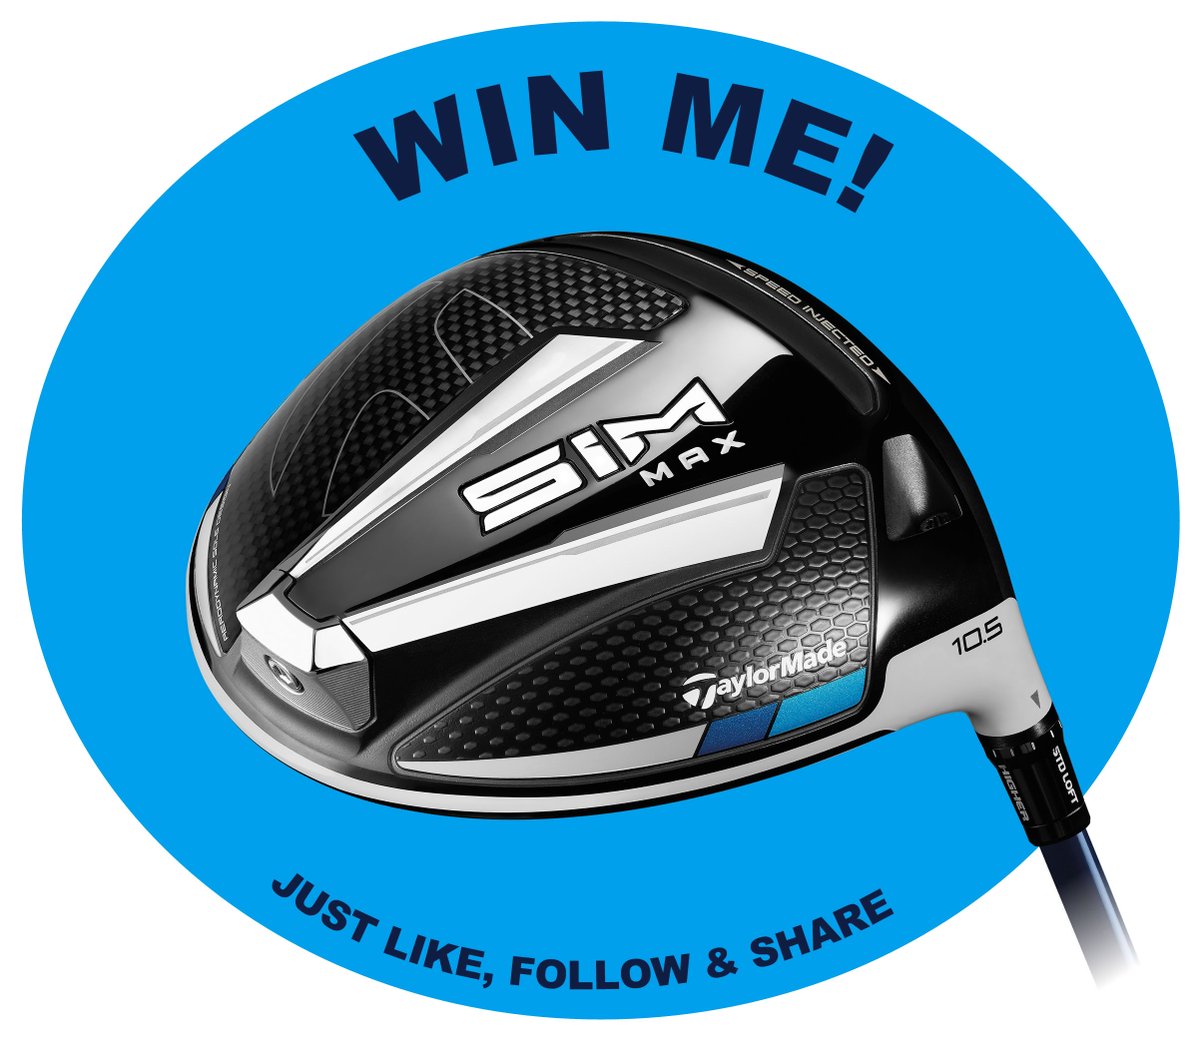 FINAL DAY TO ENTER - WIN a TaylorMade SIM MAX Driver. Just like and share BEFORE FEB 29th to be in the draw to win! 
#taylormade #sim #simmax #newtaylormadeclubs #portugalgolf #SIMdriver #Golf #TeamTaylorMade